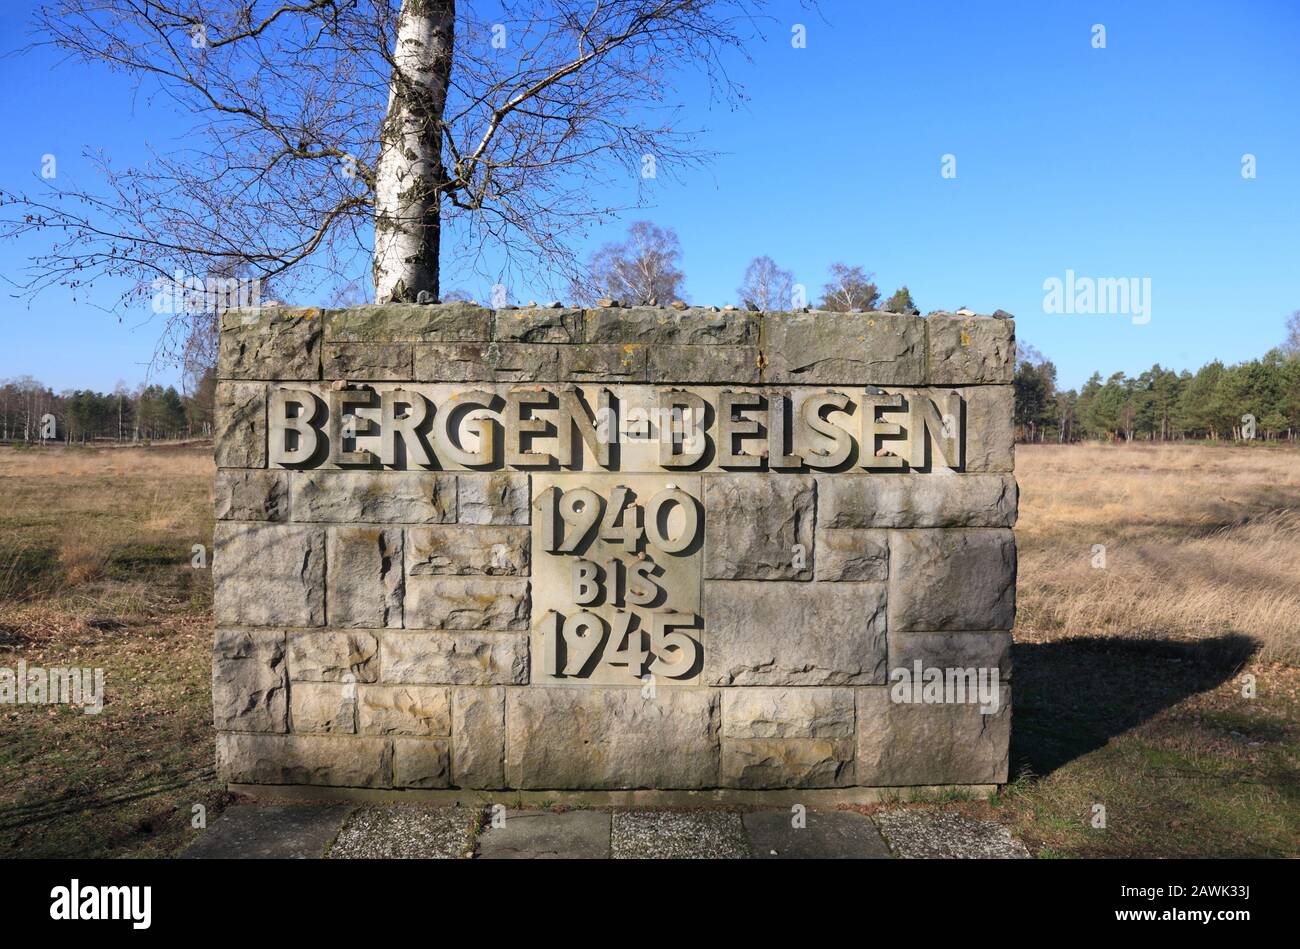 Bergen-Belsen concentration camp memorial, Lower Saxony, Germany, Europe Stock Photo